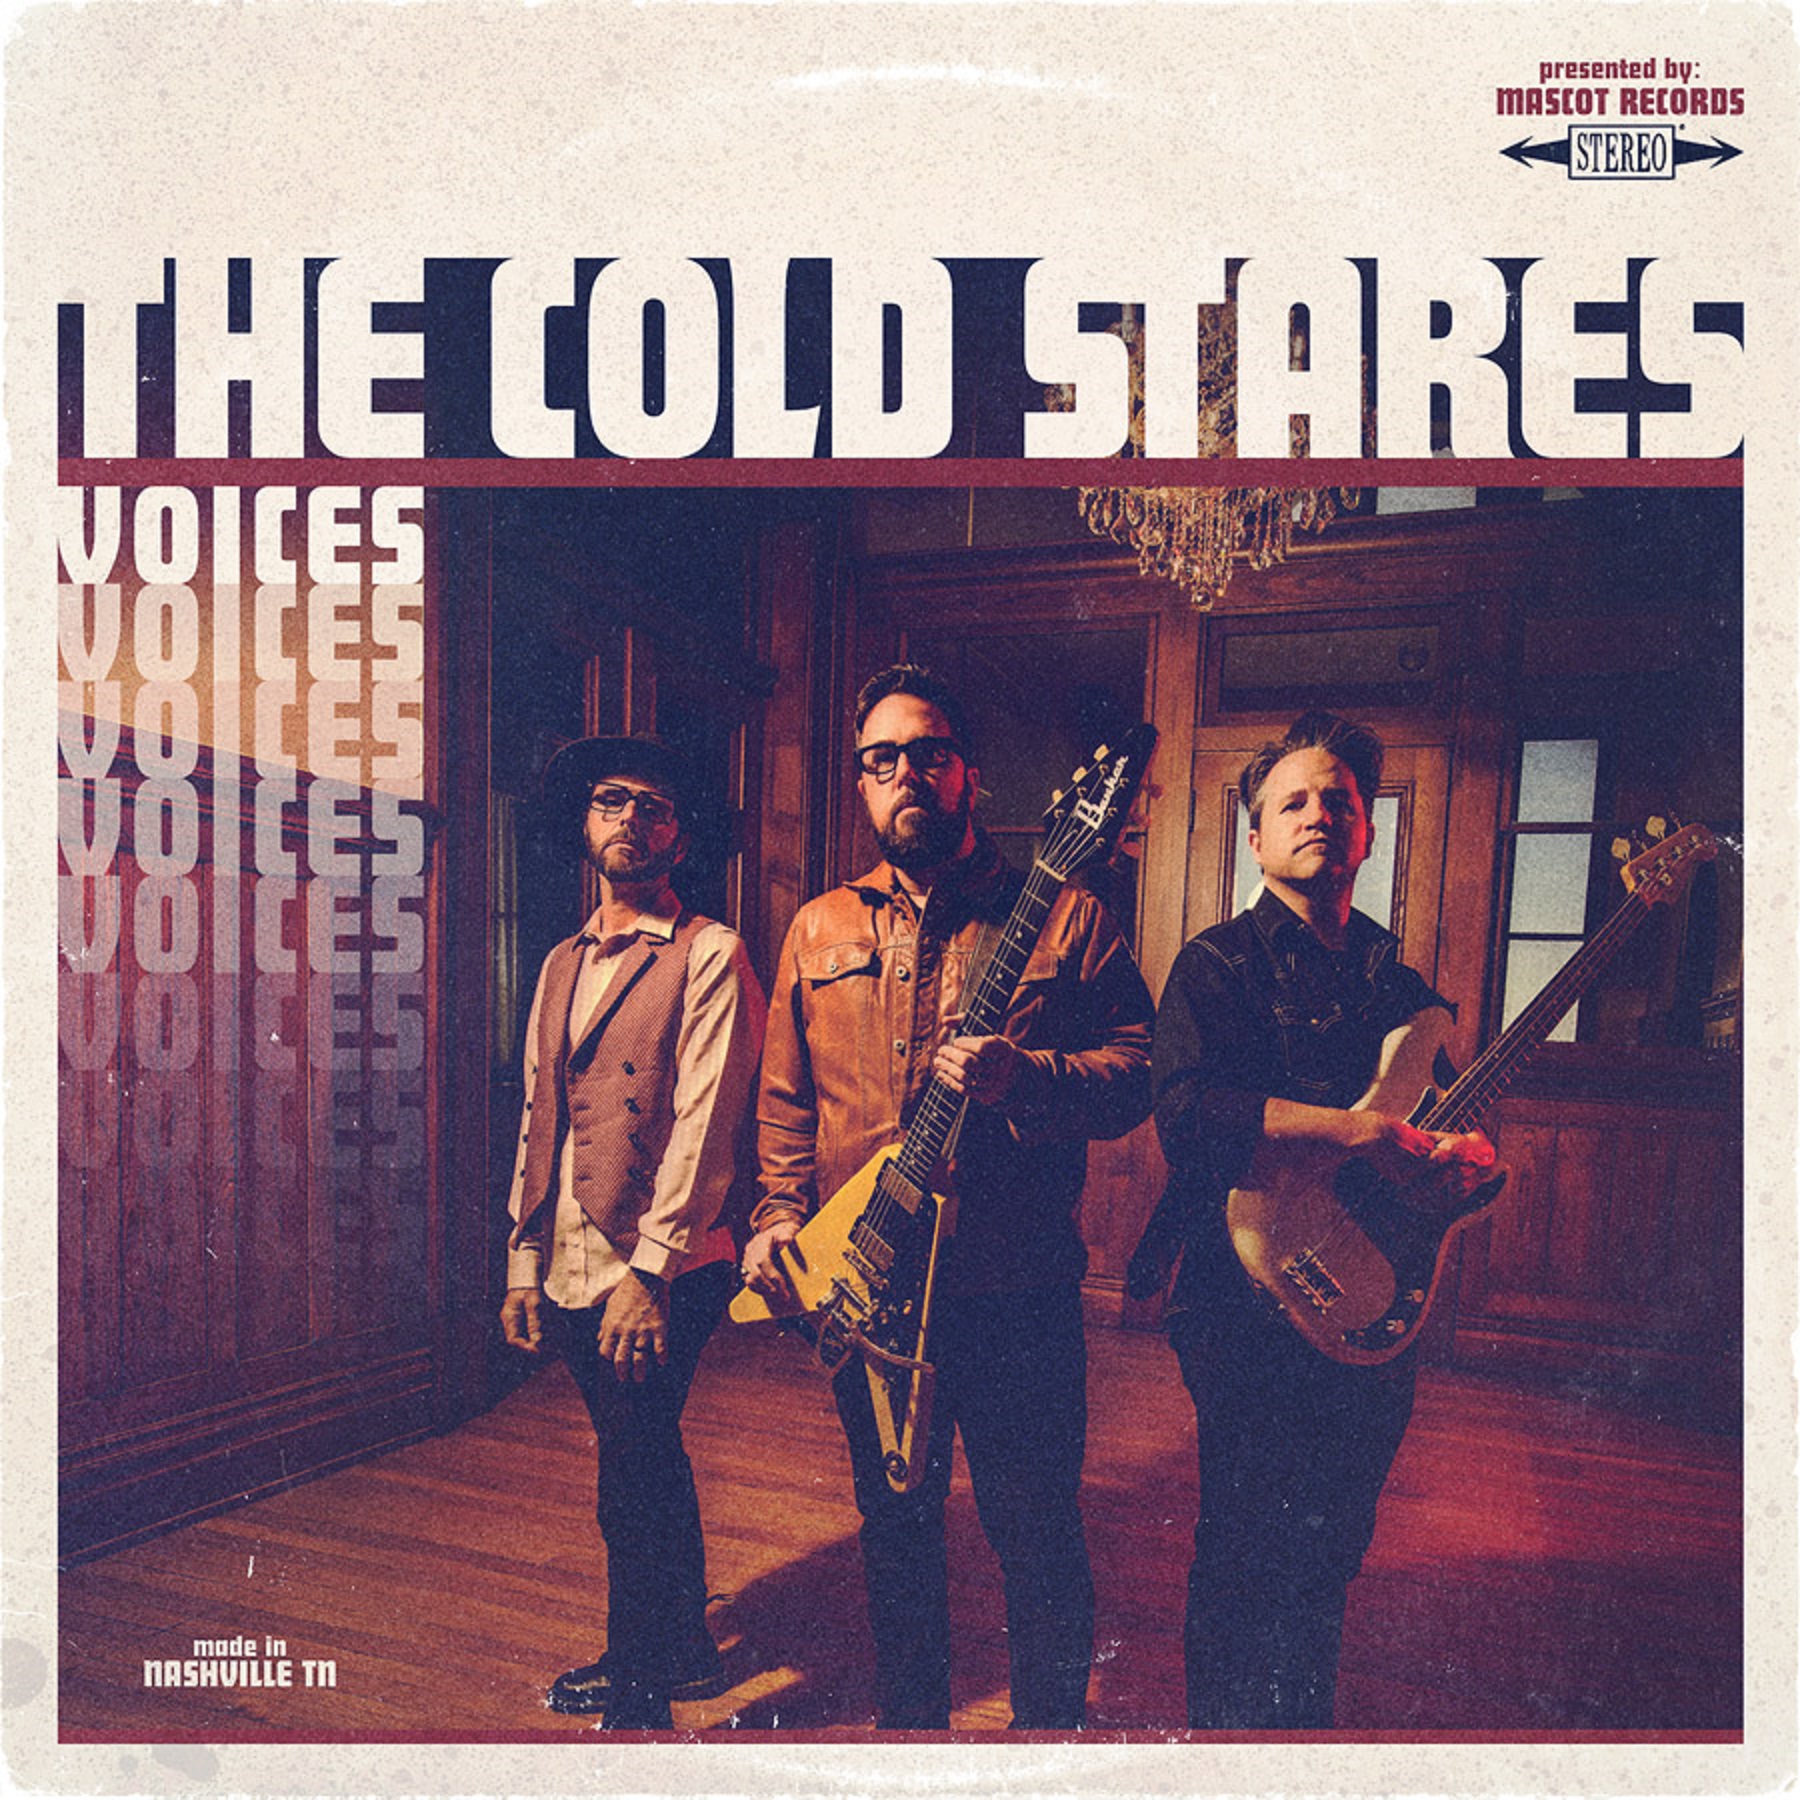 Indiana blues-rock outfit The Cold Stares announce ‘Voices,’ their explosive new full-length album, out 3/10 via Mascot Records